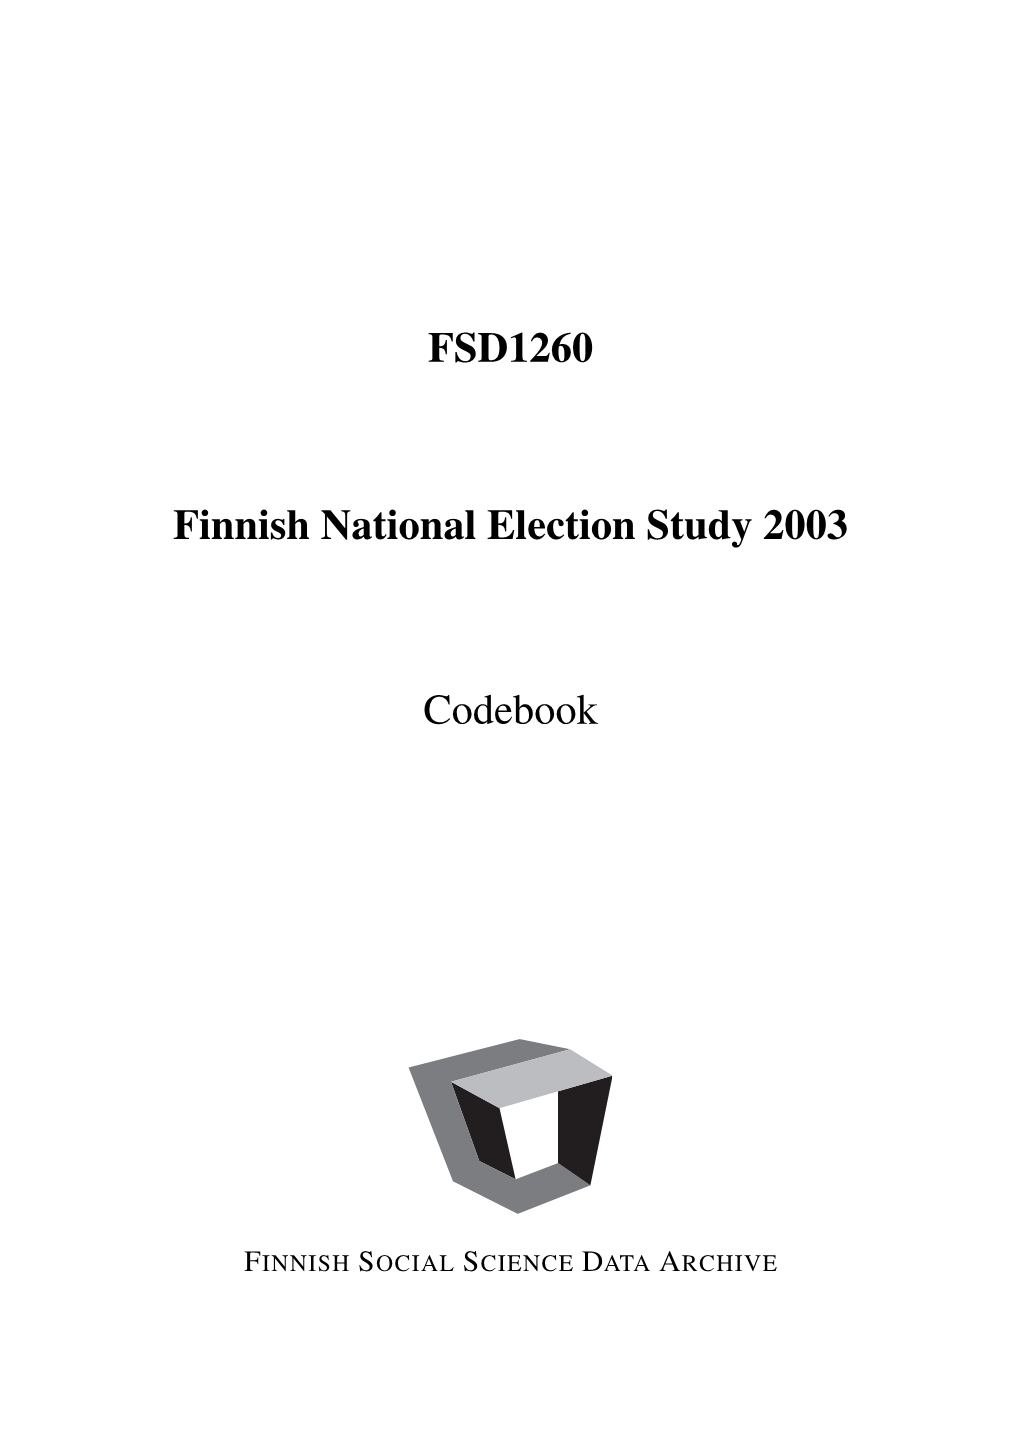 FSD1260 Finnish National Election Study 2003 Codebook